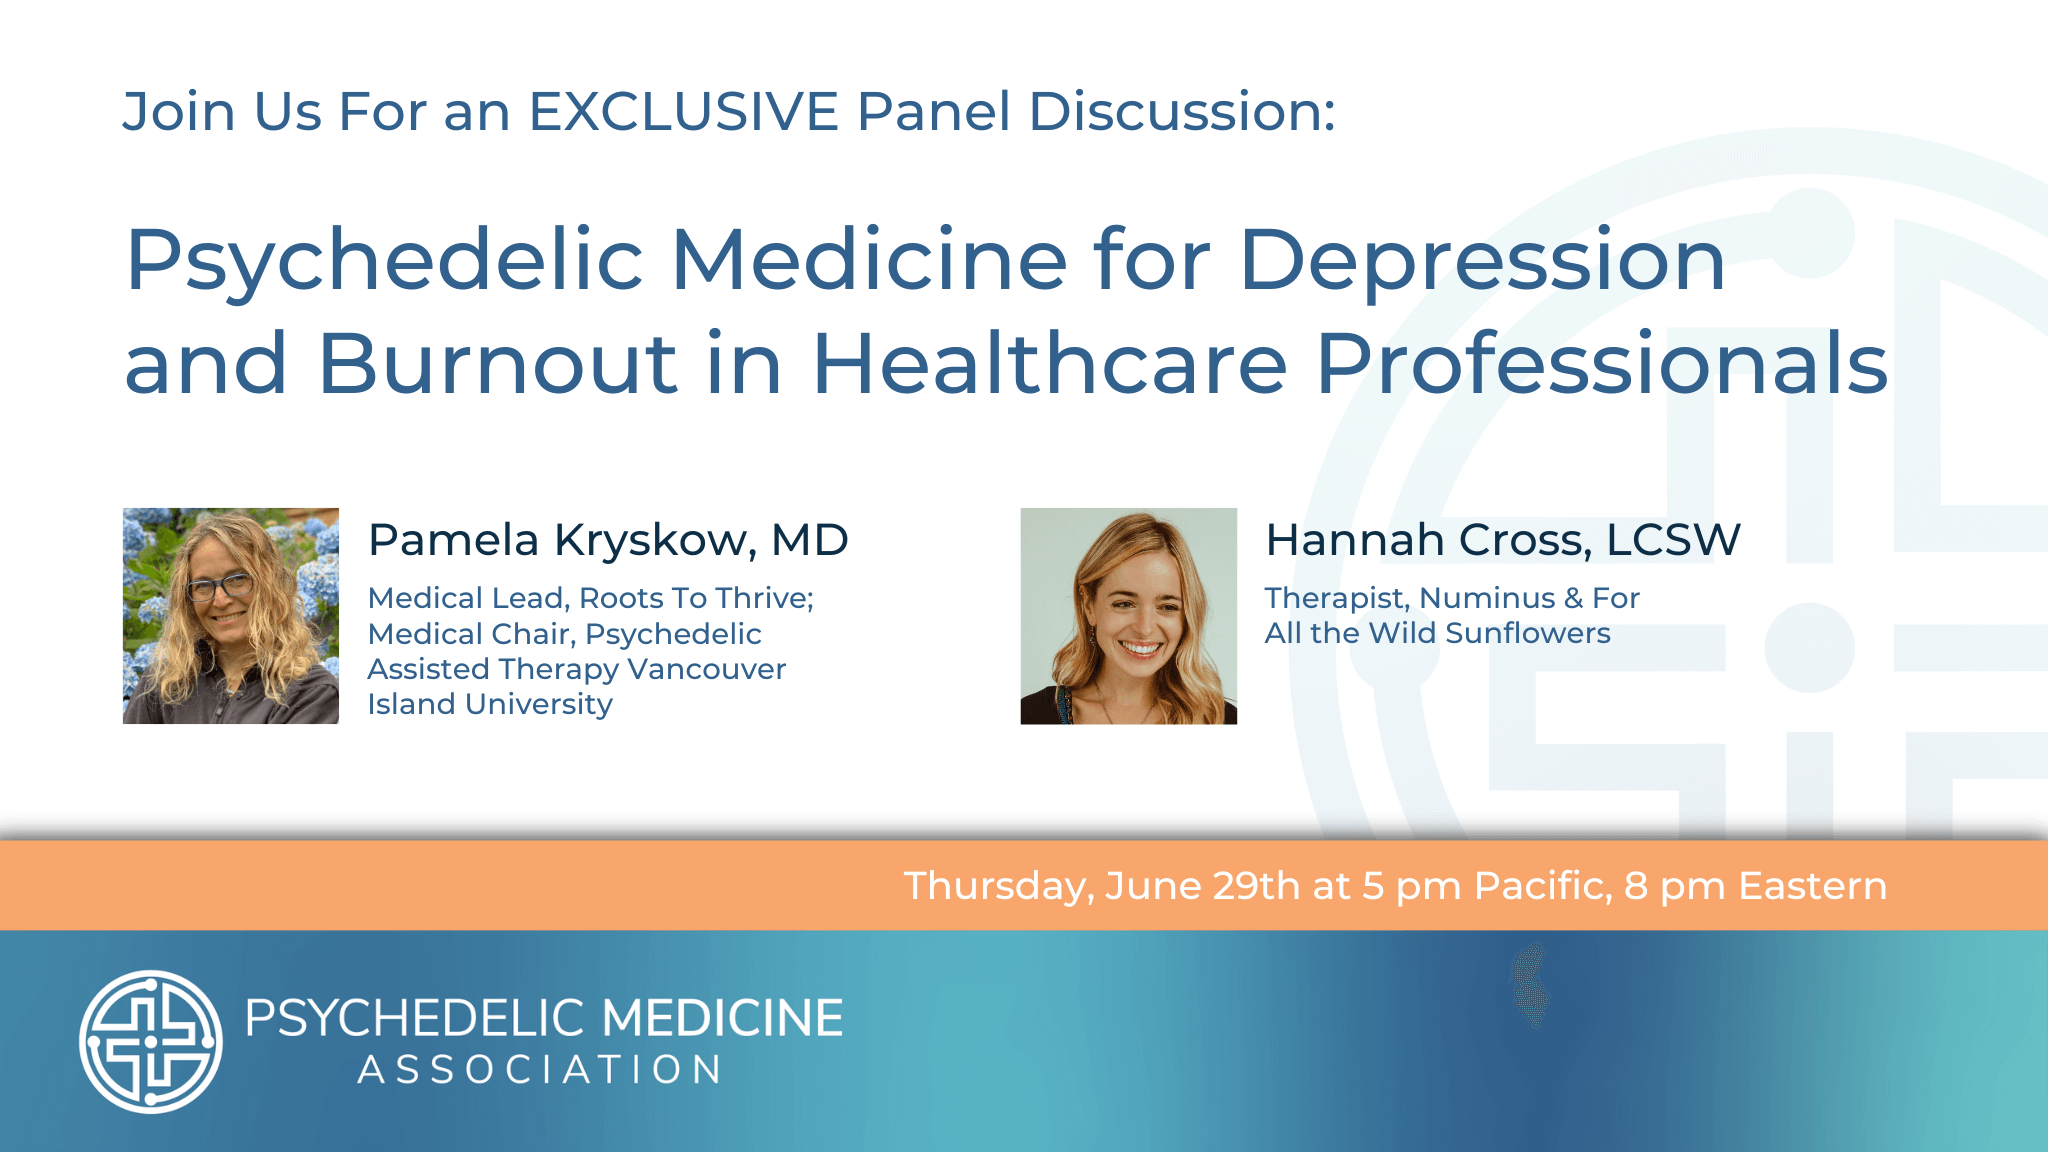 Psychedelic Medicine for Depression and Burnout in Healthcare Professionals - Psychedelic Medicine Association Webinar featuring Pamela Kryskow, MD and Hannah Cross, LCSW